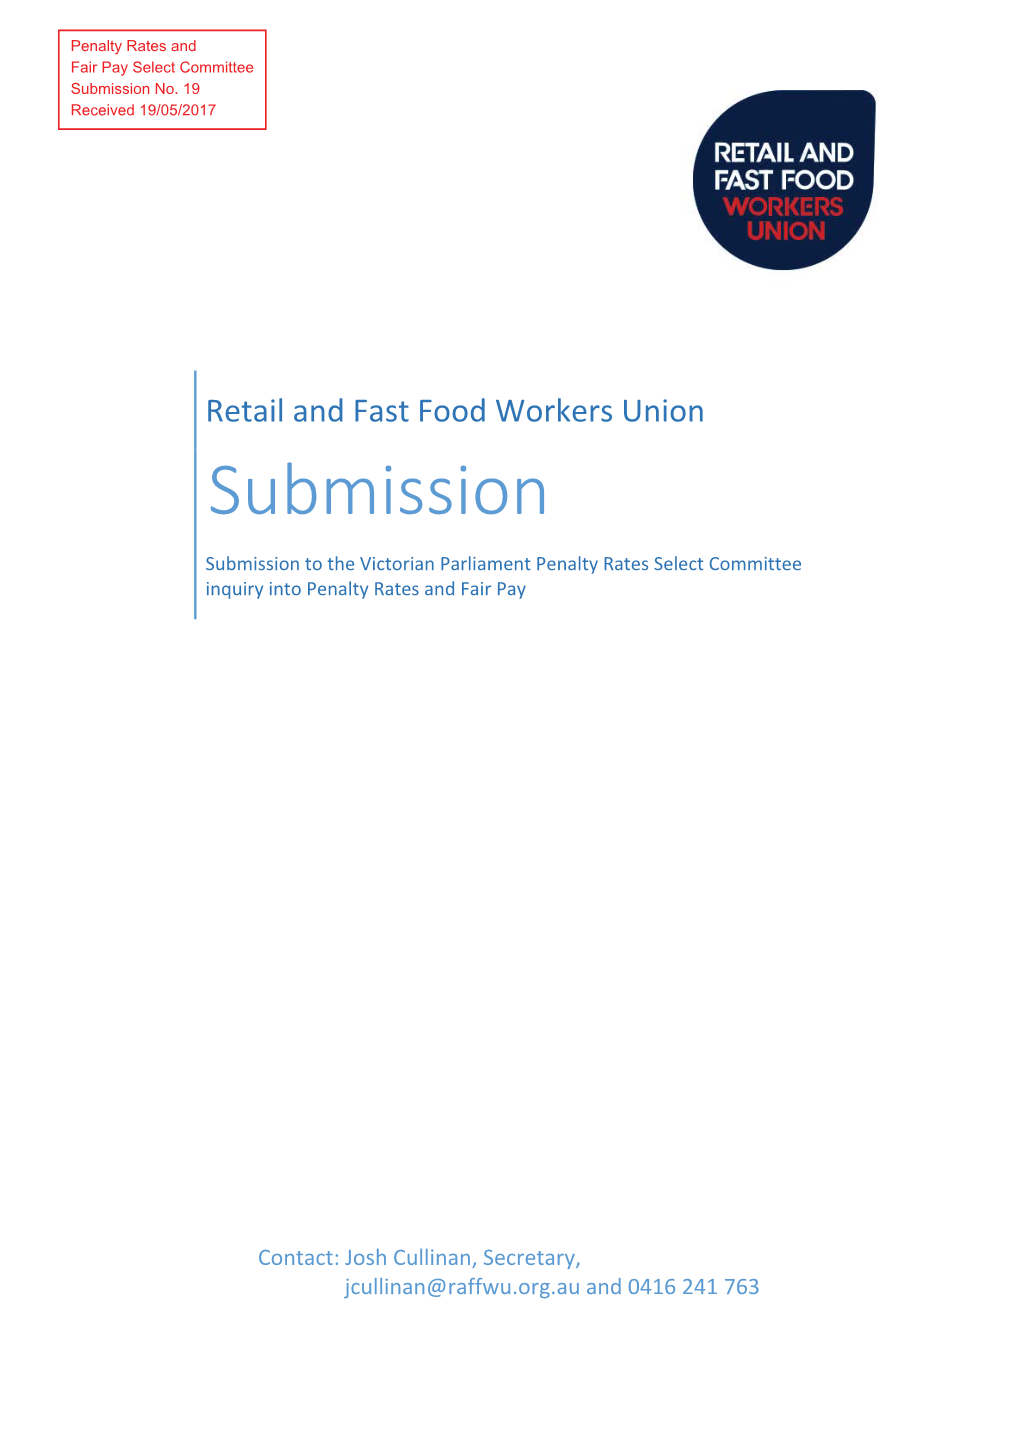 Retail and Fast Food Workers Union Submission